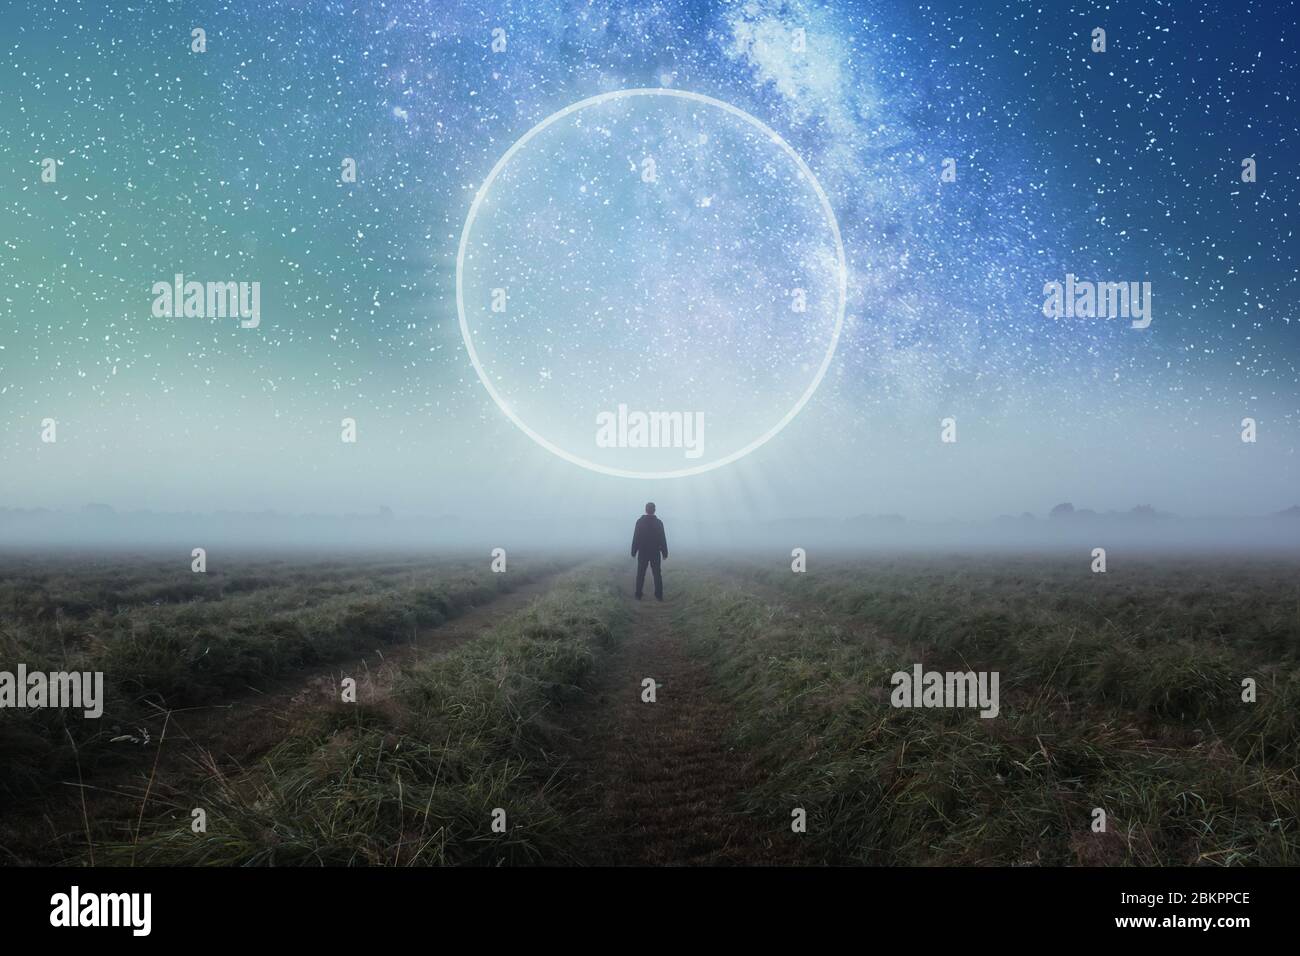 A science fiction concept. A man standing in a field looking out across space with a glowing portal in the night sky Stock Photo